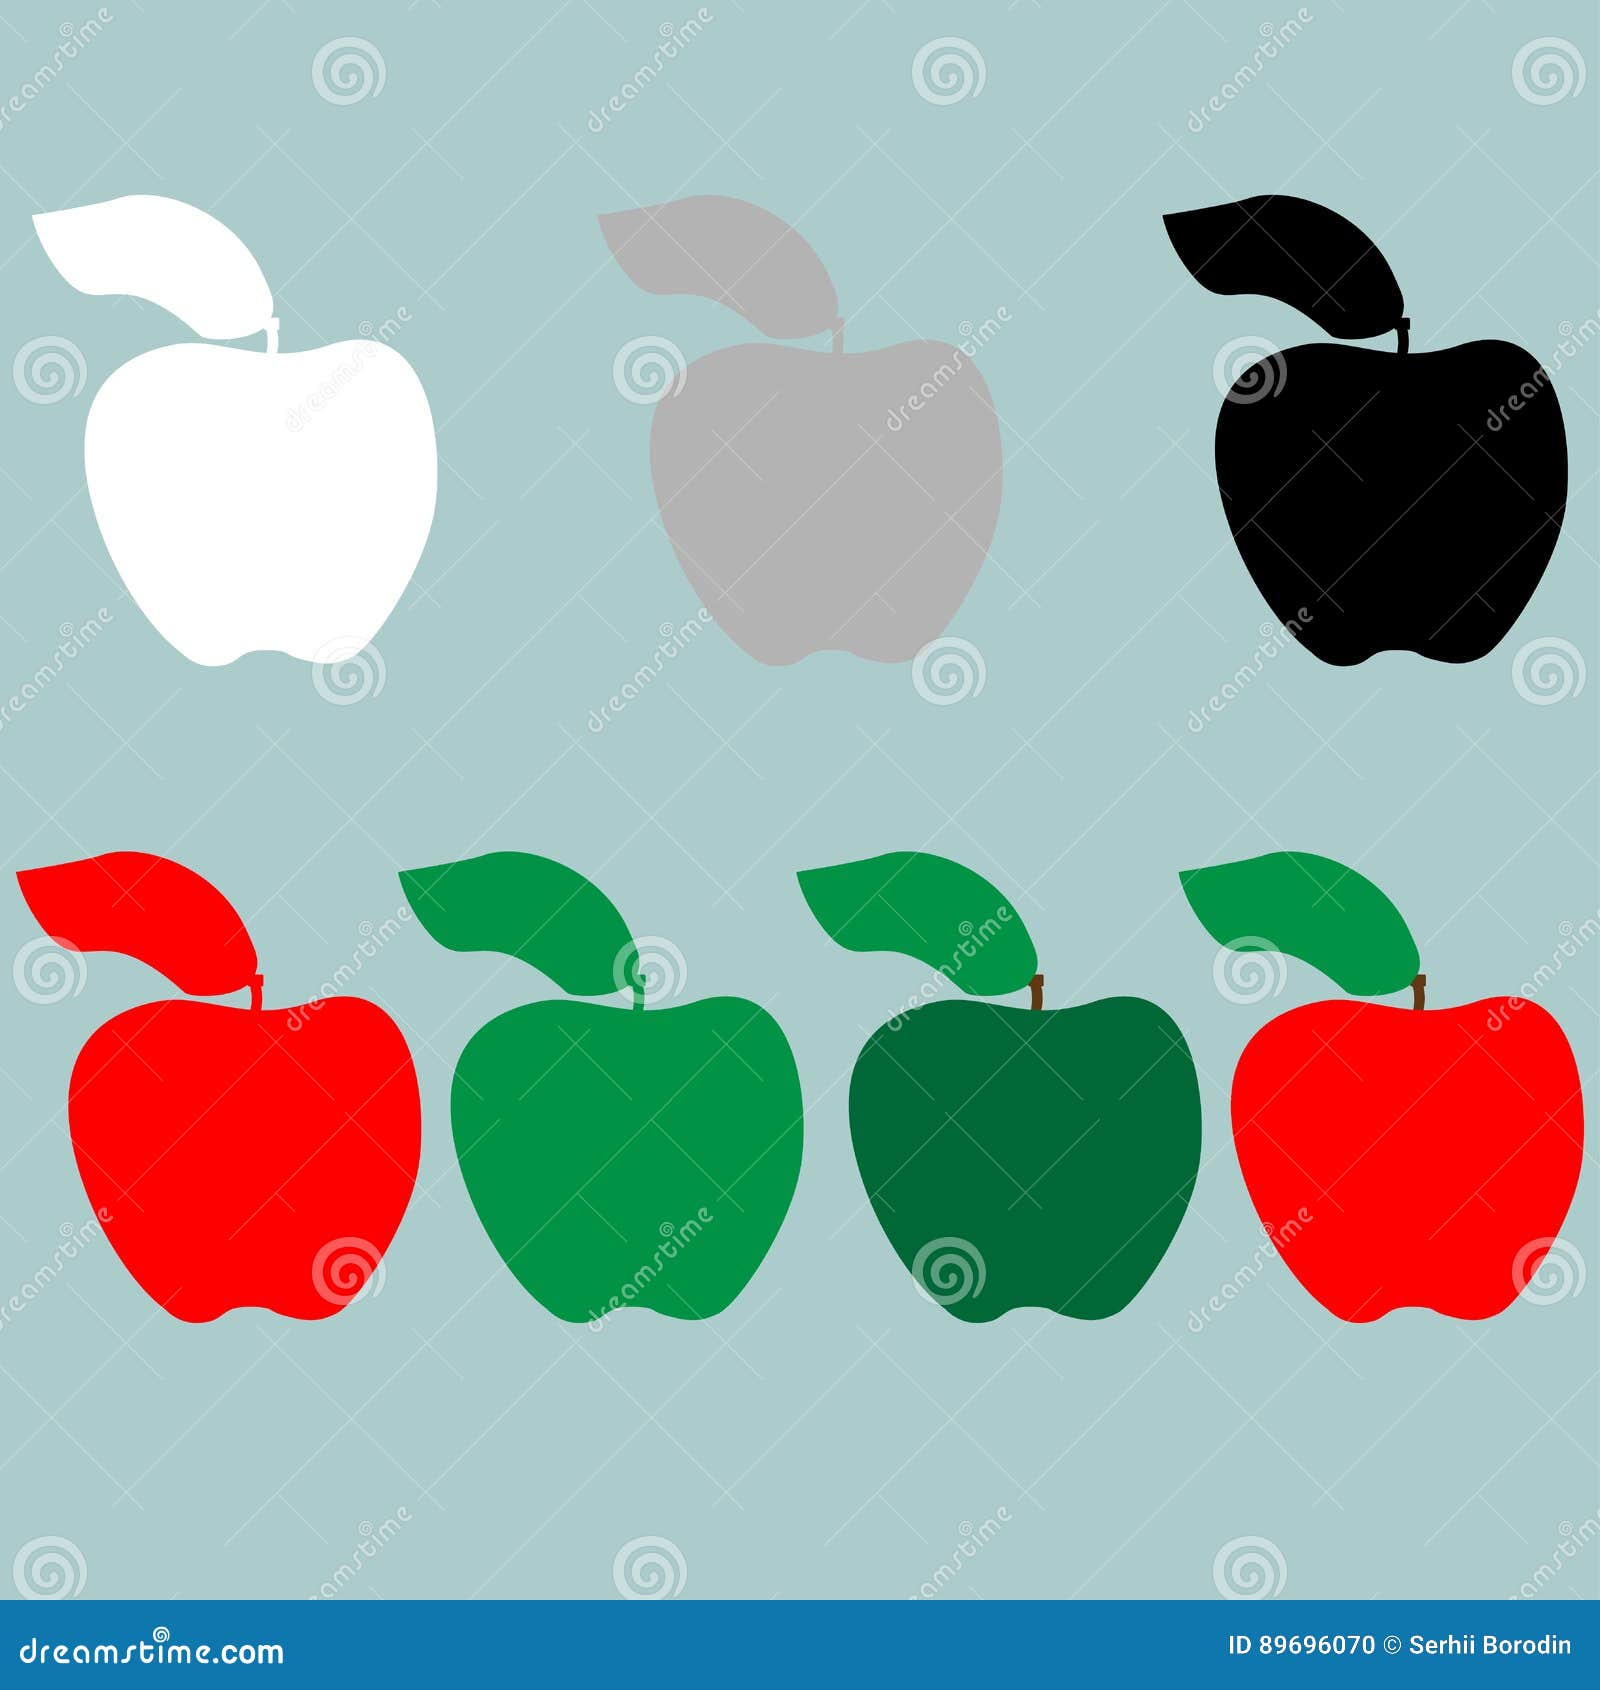 Red apple icon - Free red site logo icons